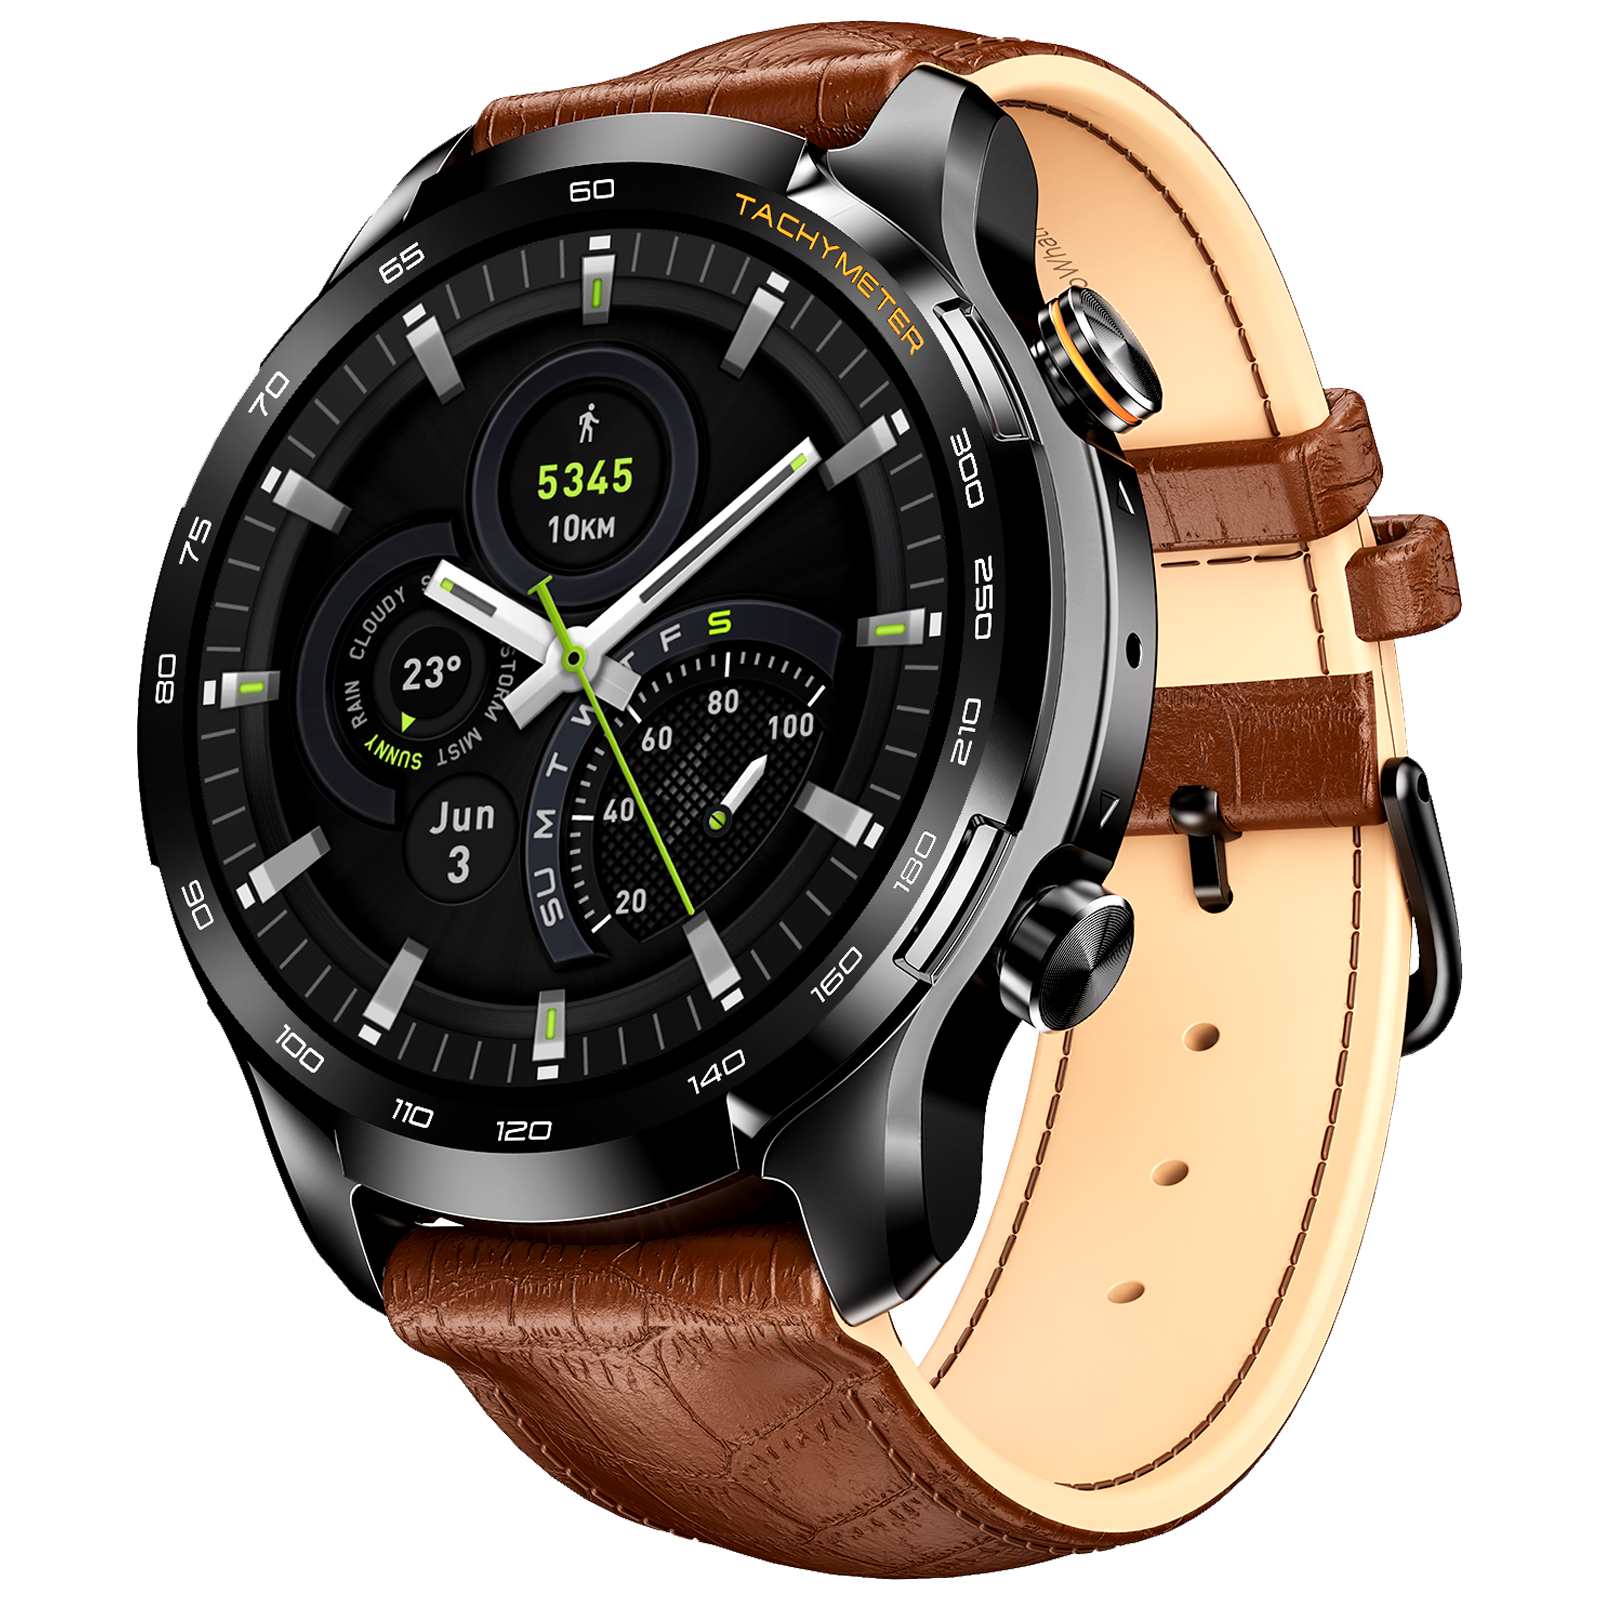 

boAt Lunar Pro LTE Bluetooth+4G SIM Android OS Wristphone (35.3mm AMOLED Display, In-built GPS, Brown Strap)